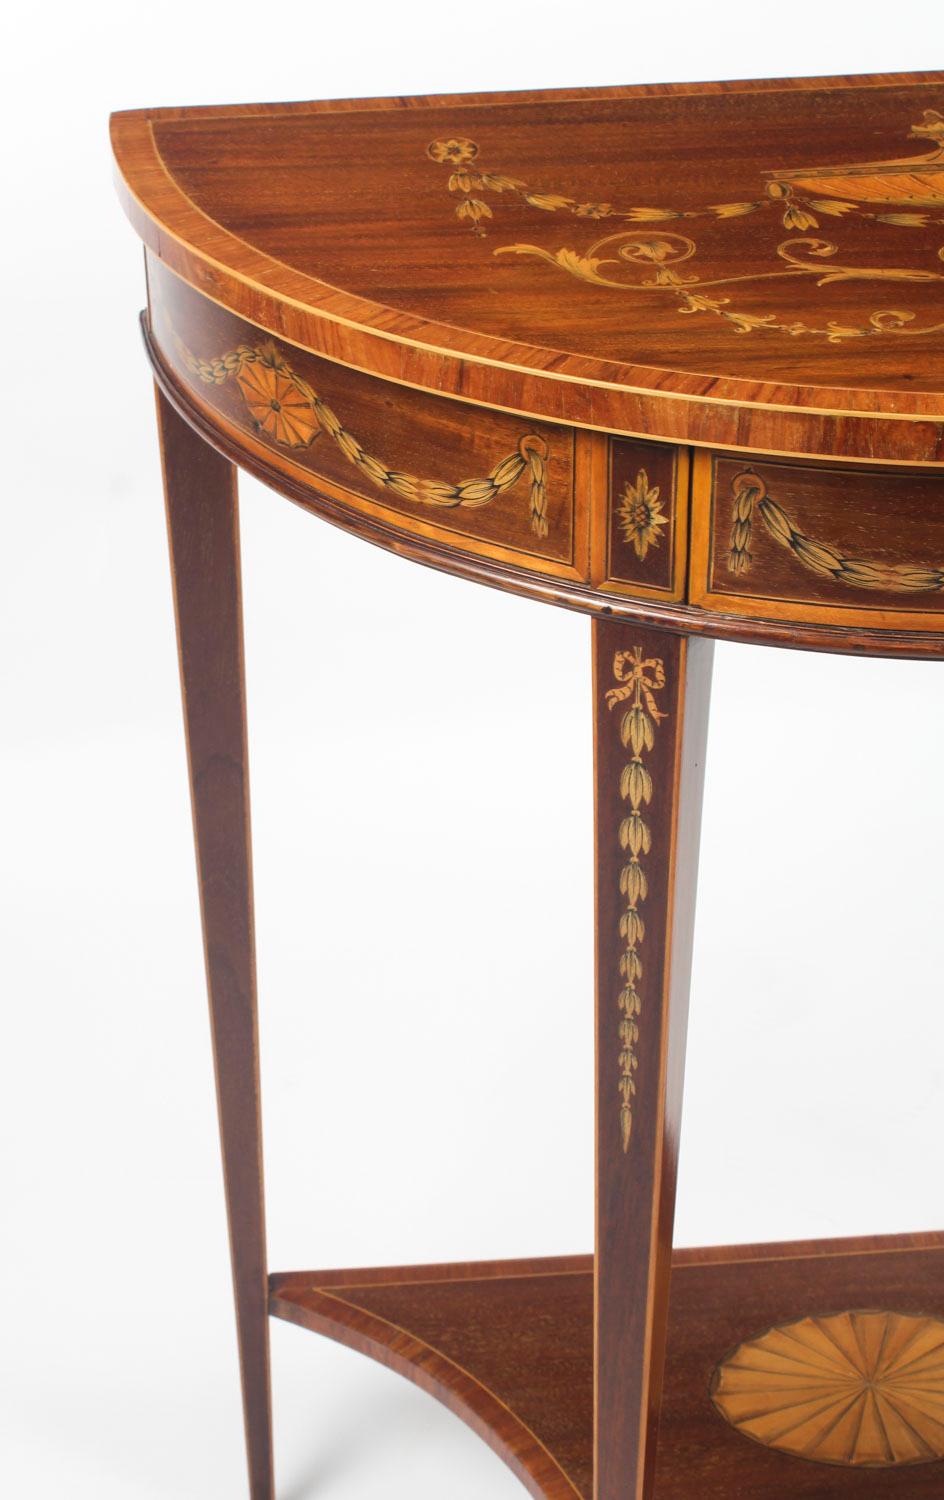 Antique Regency Revival Marquetry Console Table, 19th Century 1